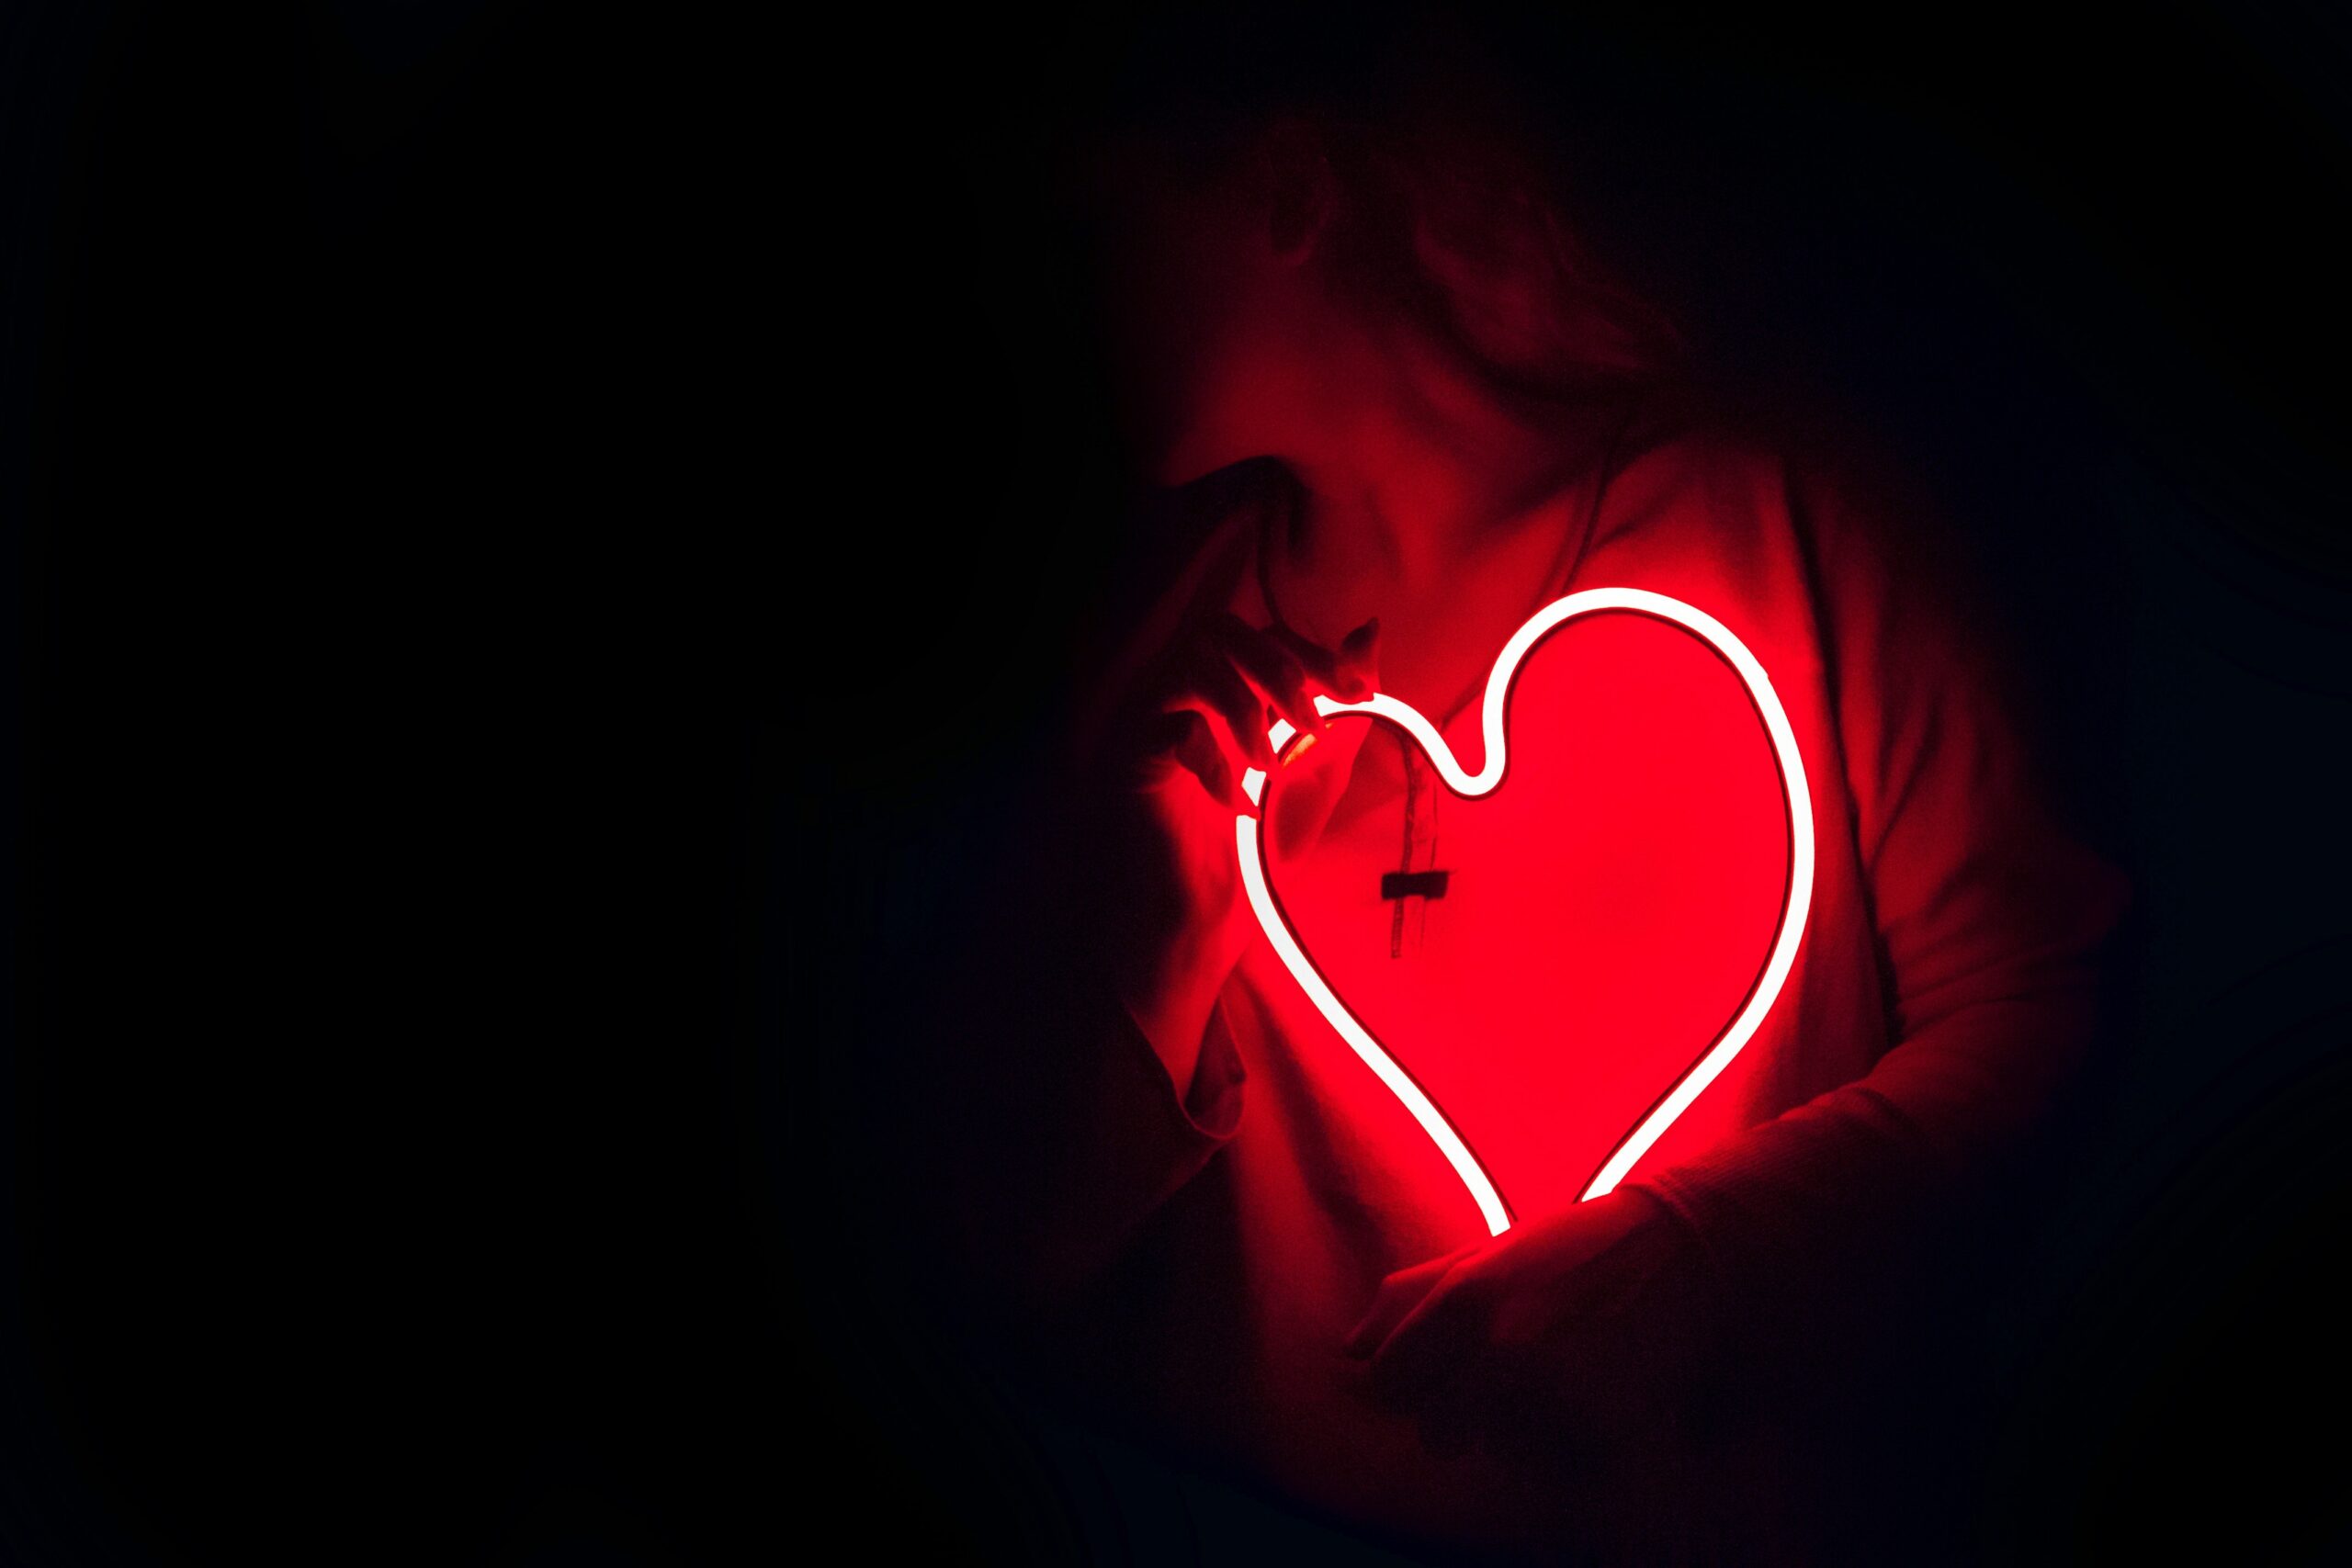 A person is holding a red heart-shaped neon light. The neon is the only light in the photo, and the person is mostly obscured by the darkness.